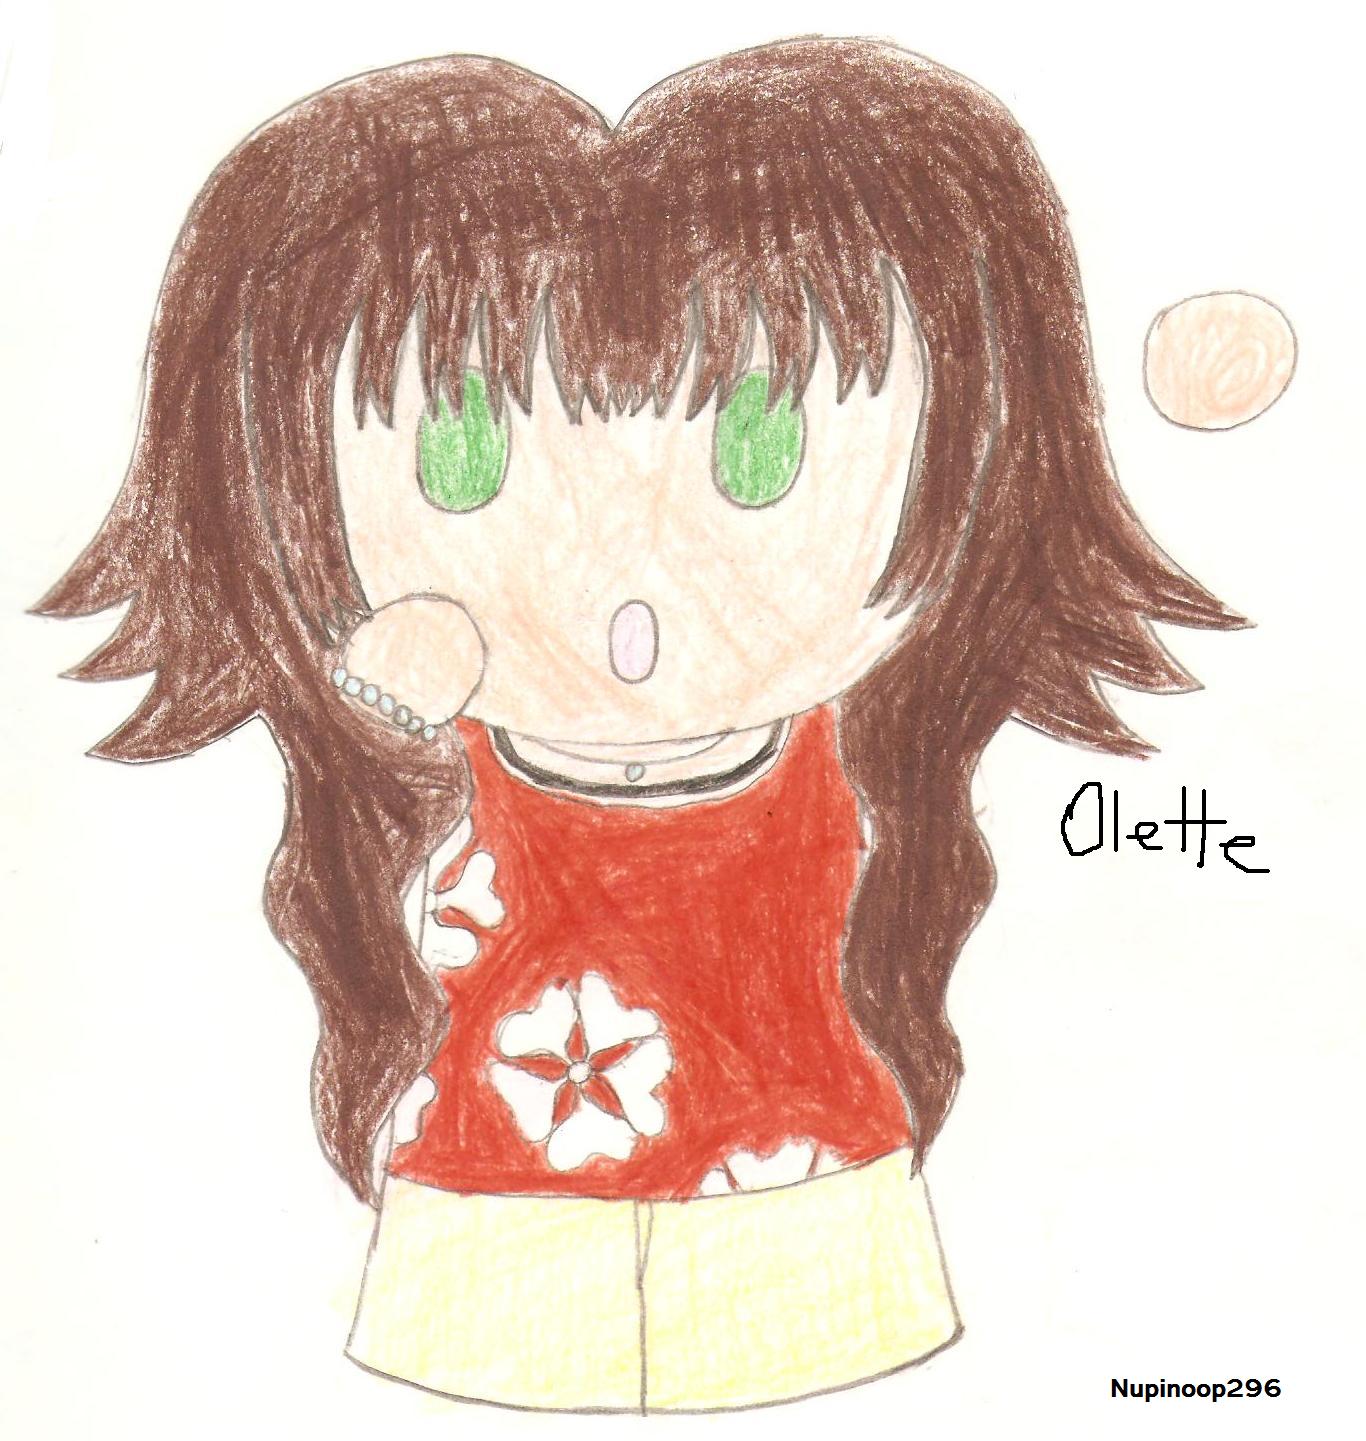 Chibi Olette by nupinoop296